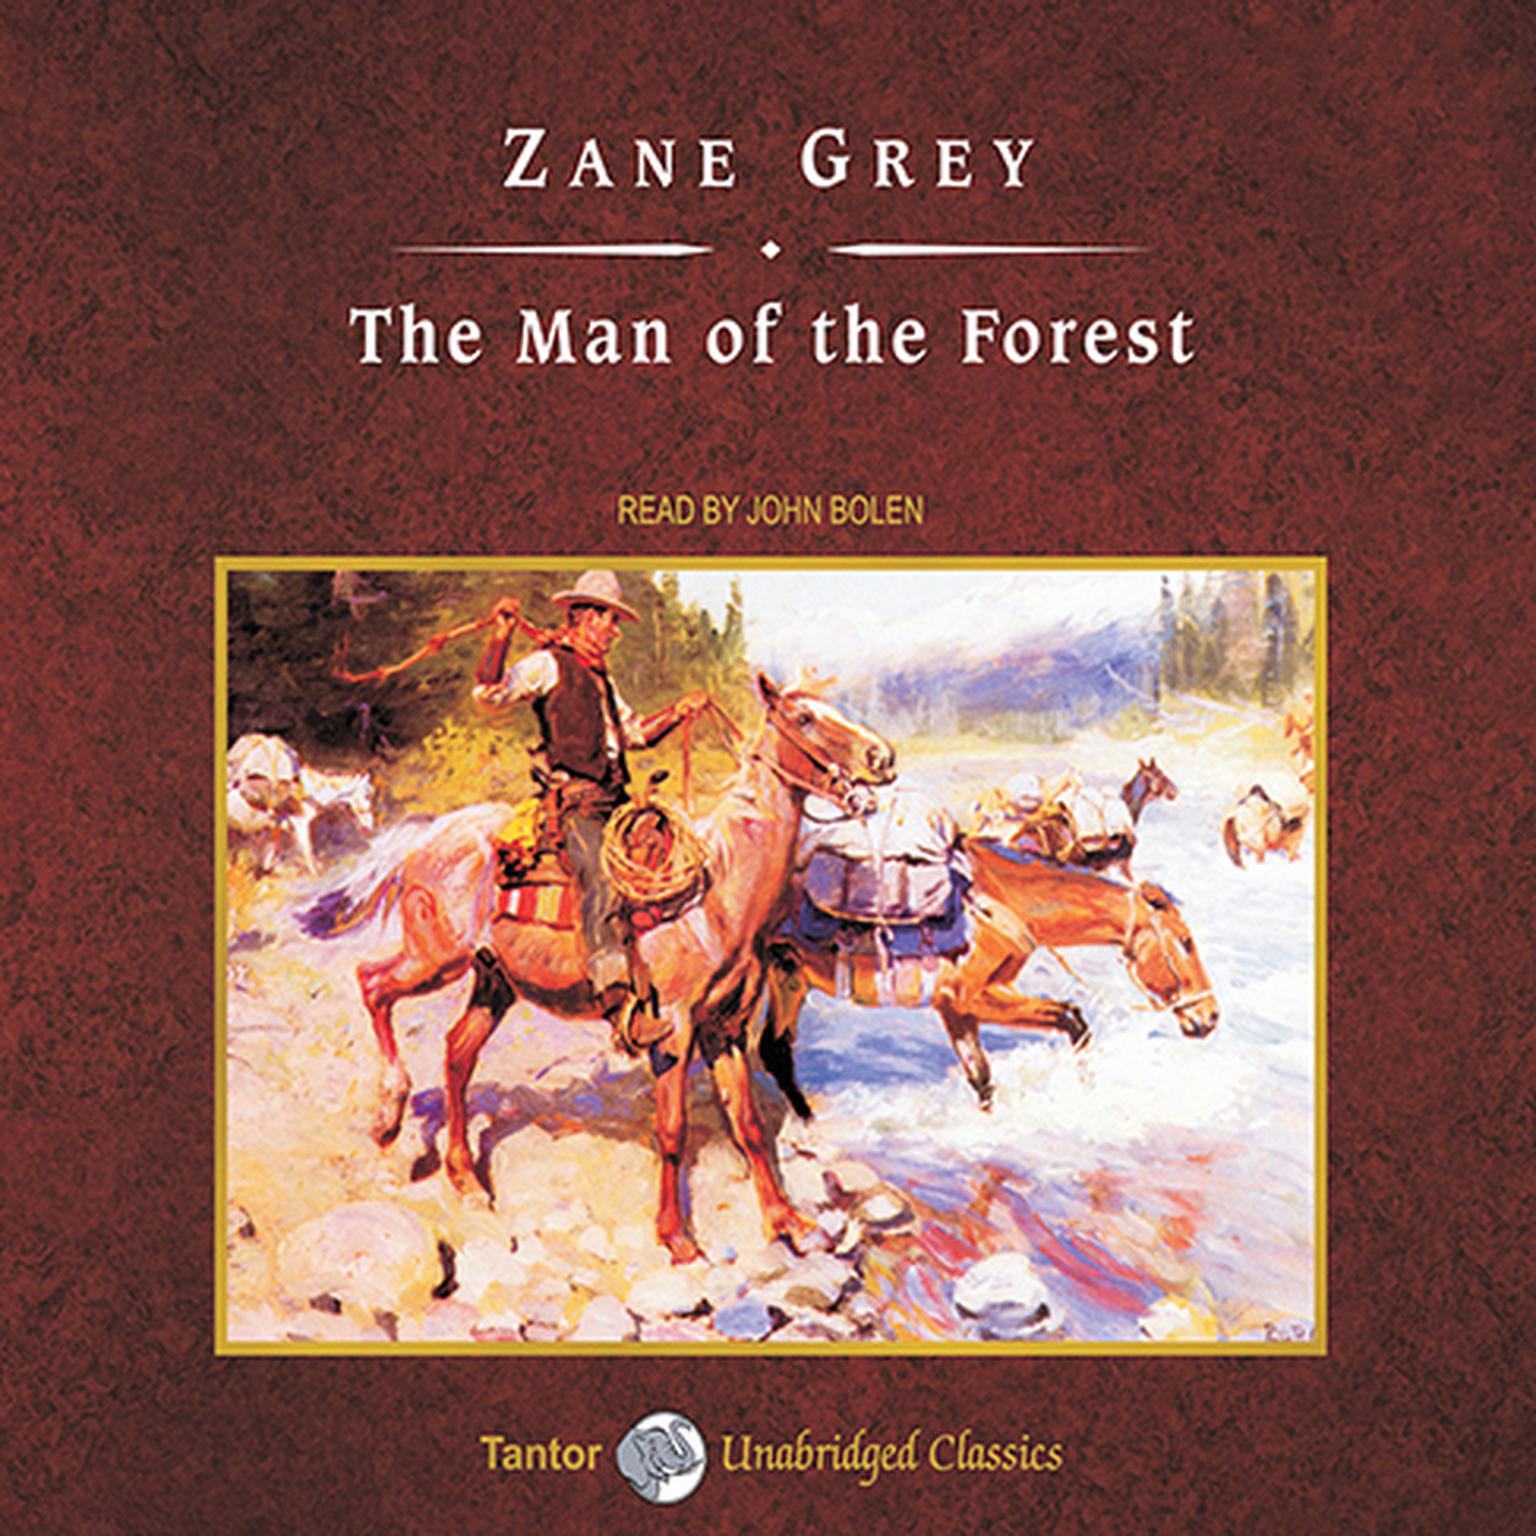 The Man of the Forest, with eBook Audiobook, by Zane Grey